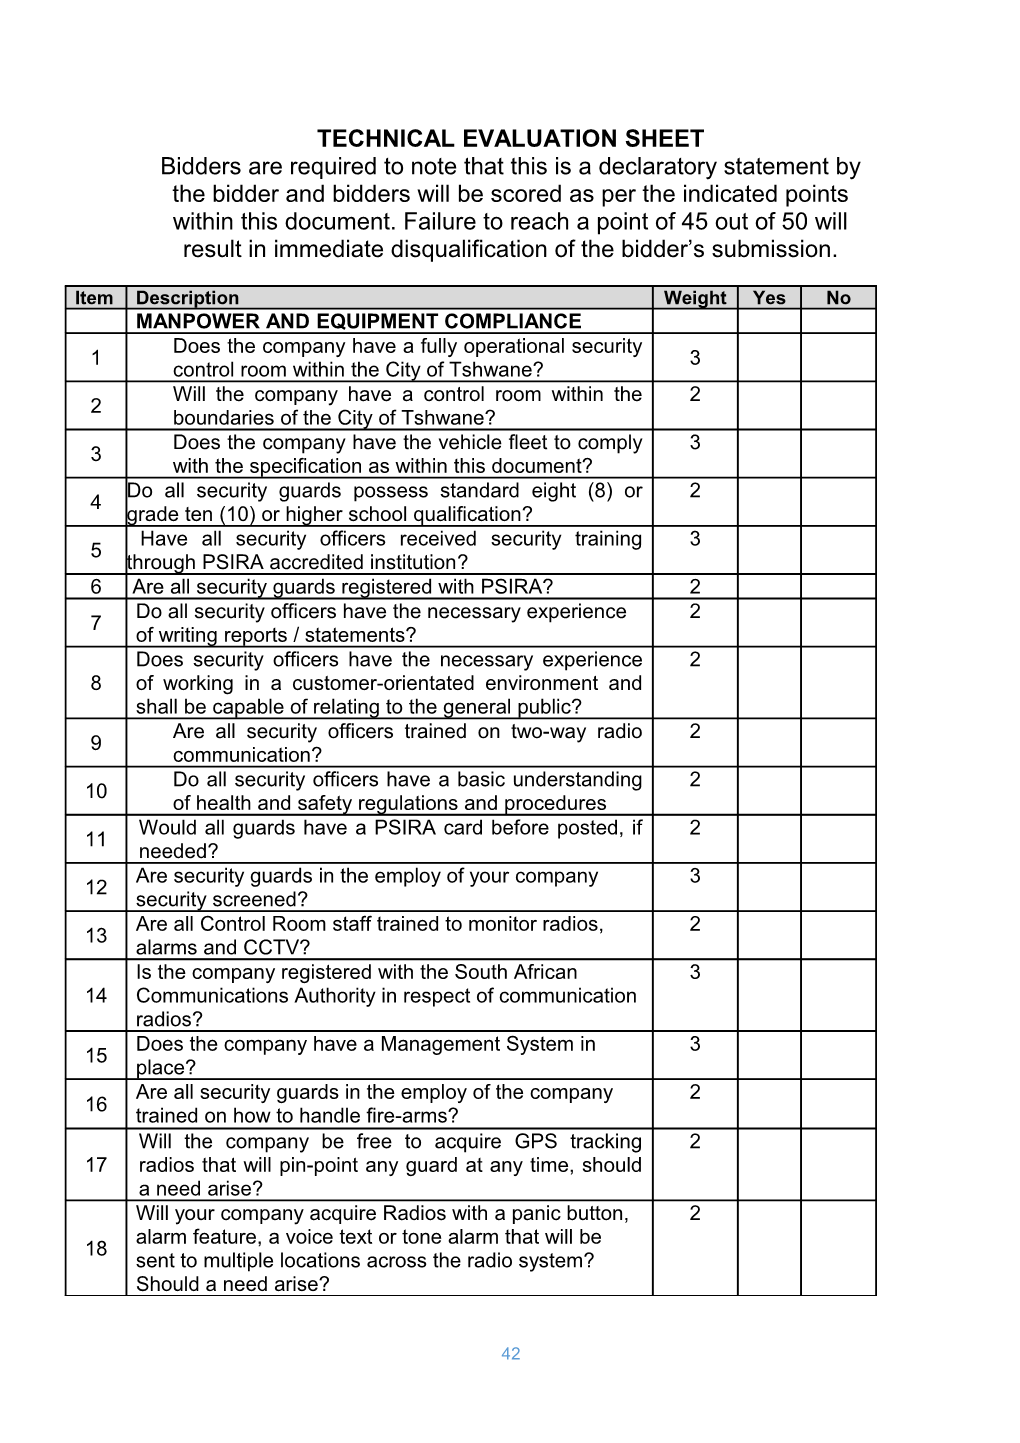 Technical Evaluation Sheet